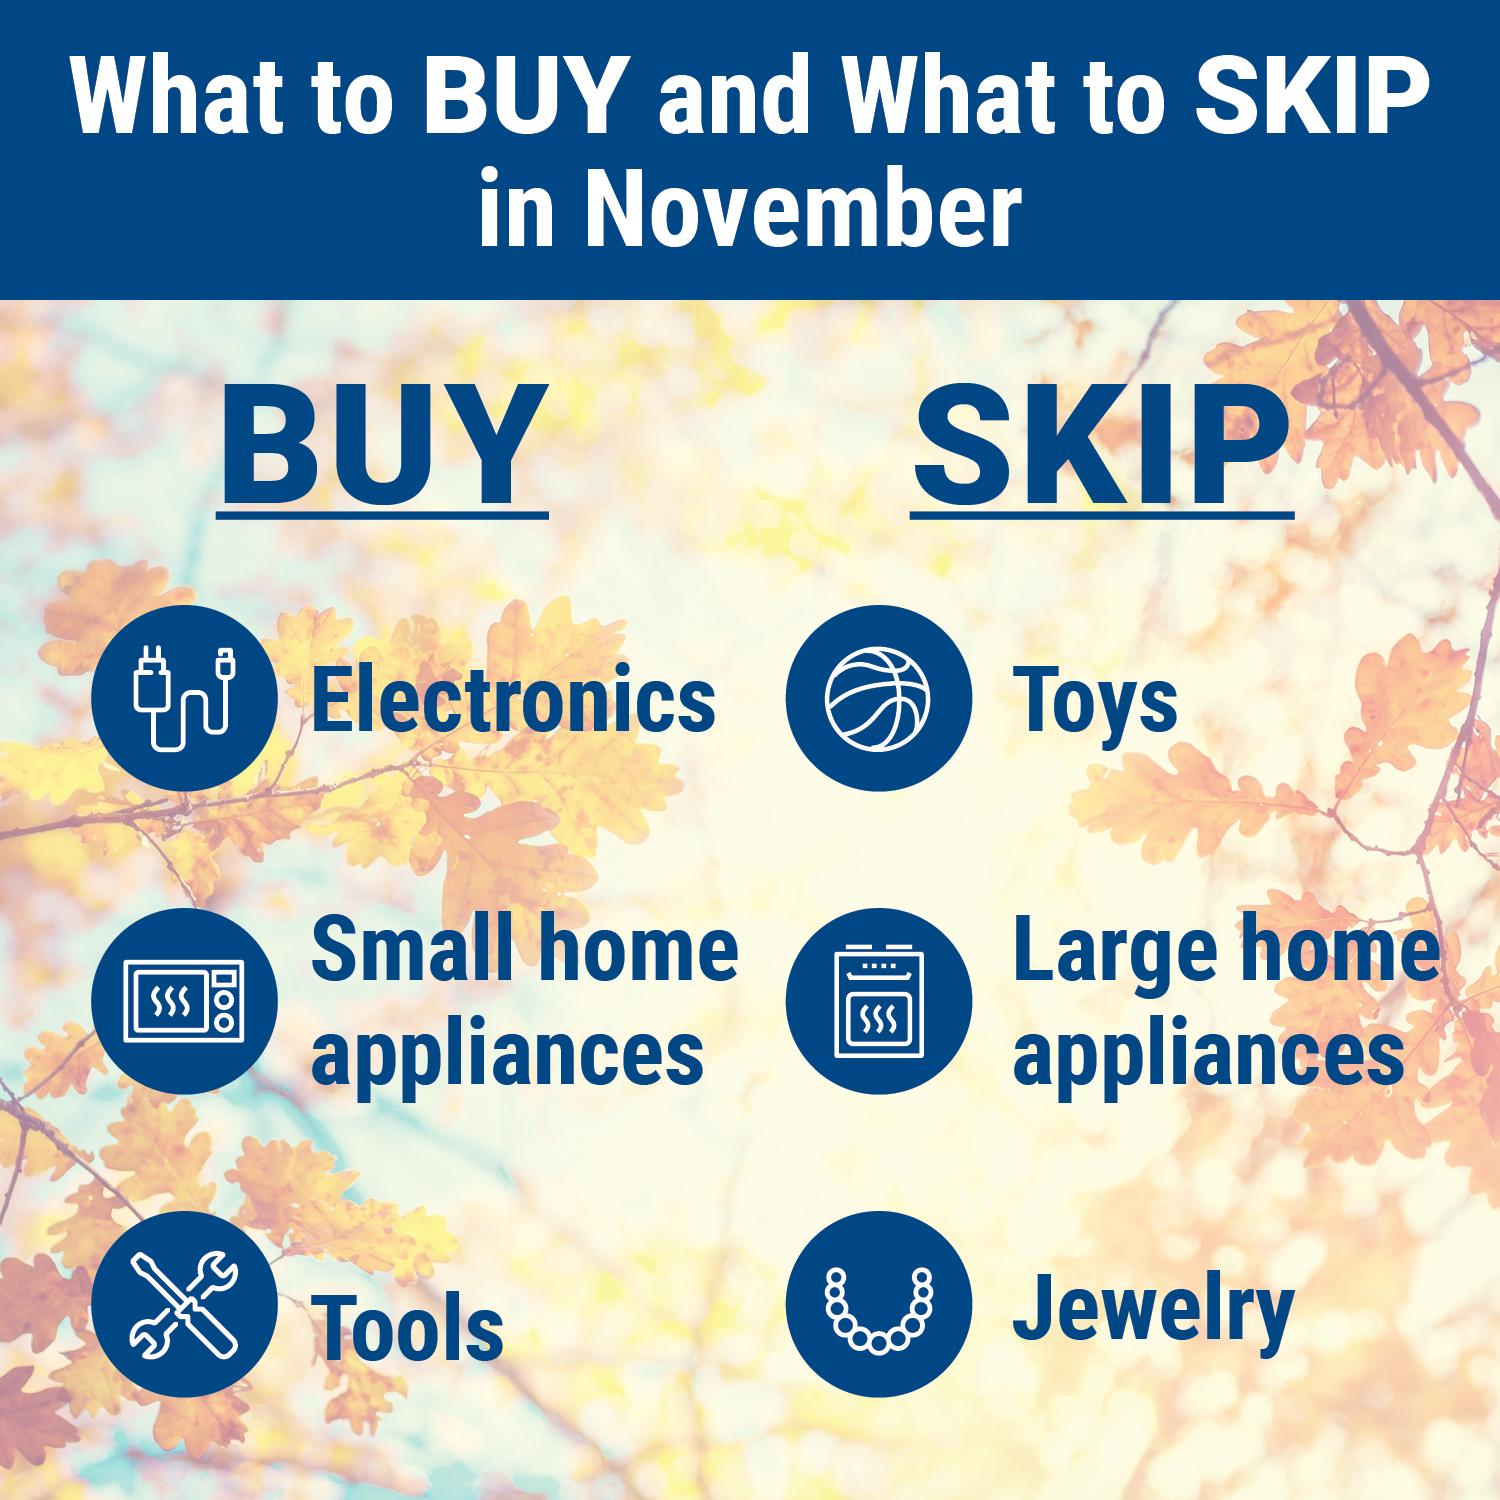 What to Buy and What to Skip in november